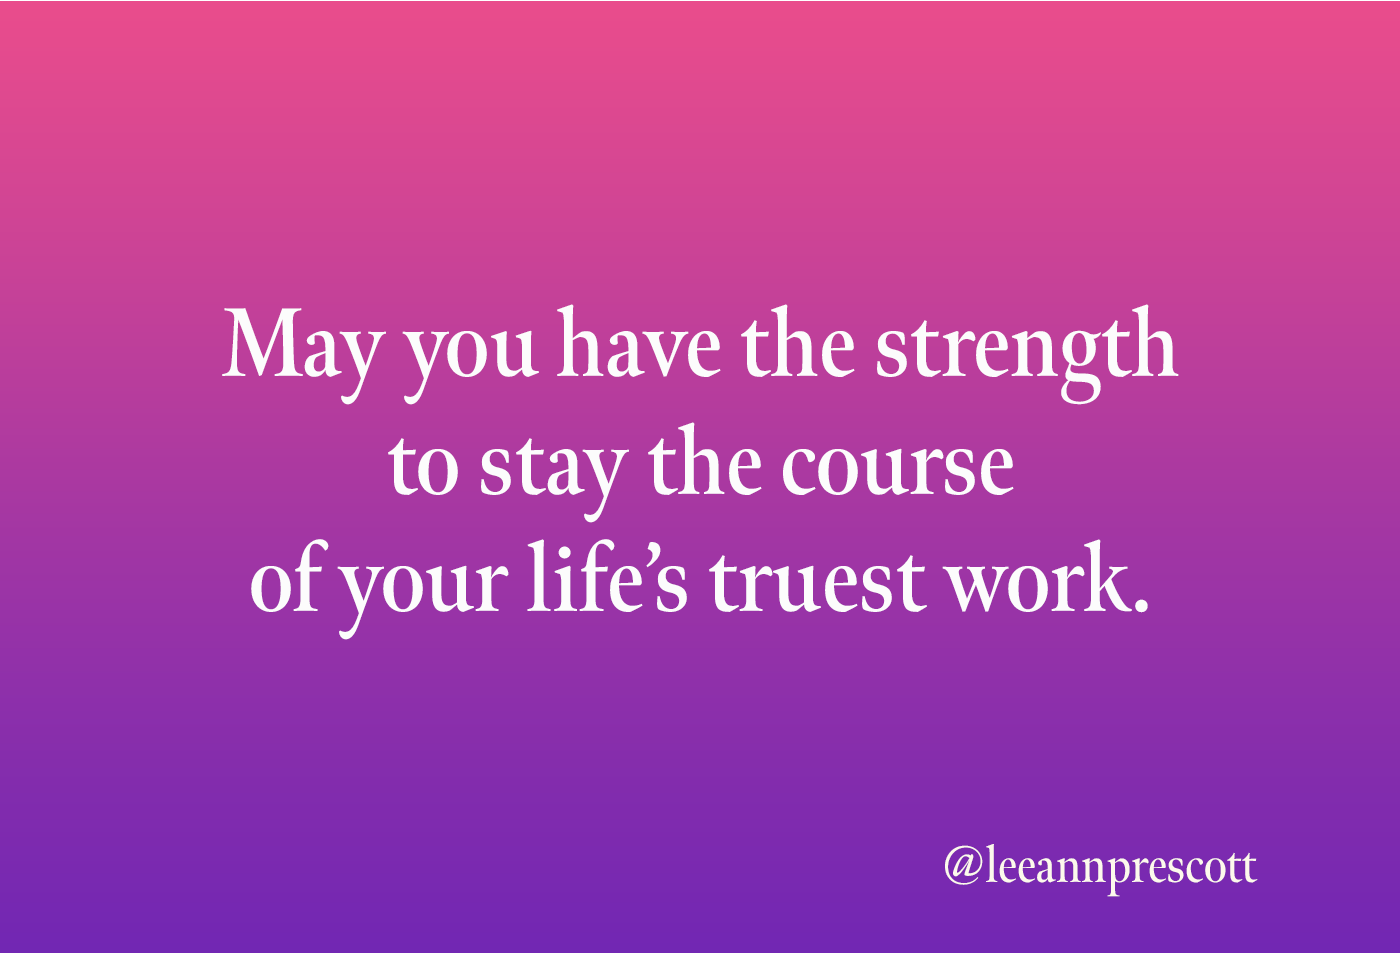 May you have the strength to stay the course of your life's truest work